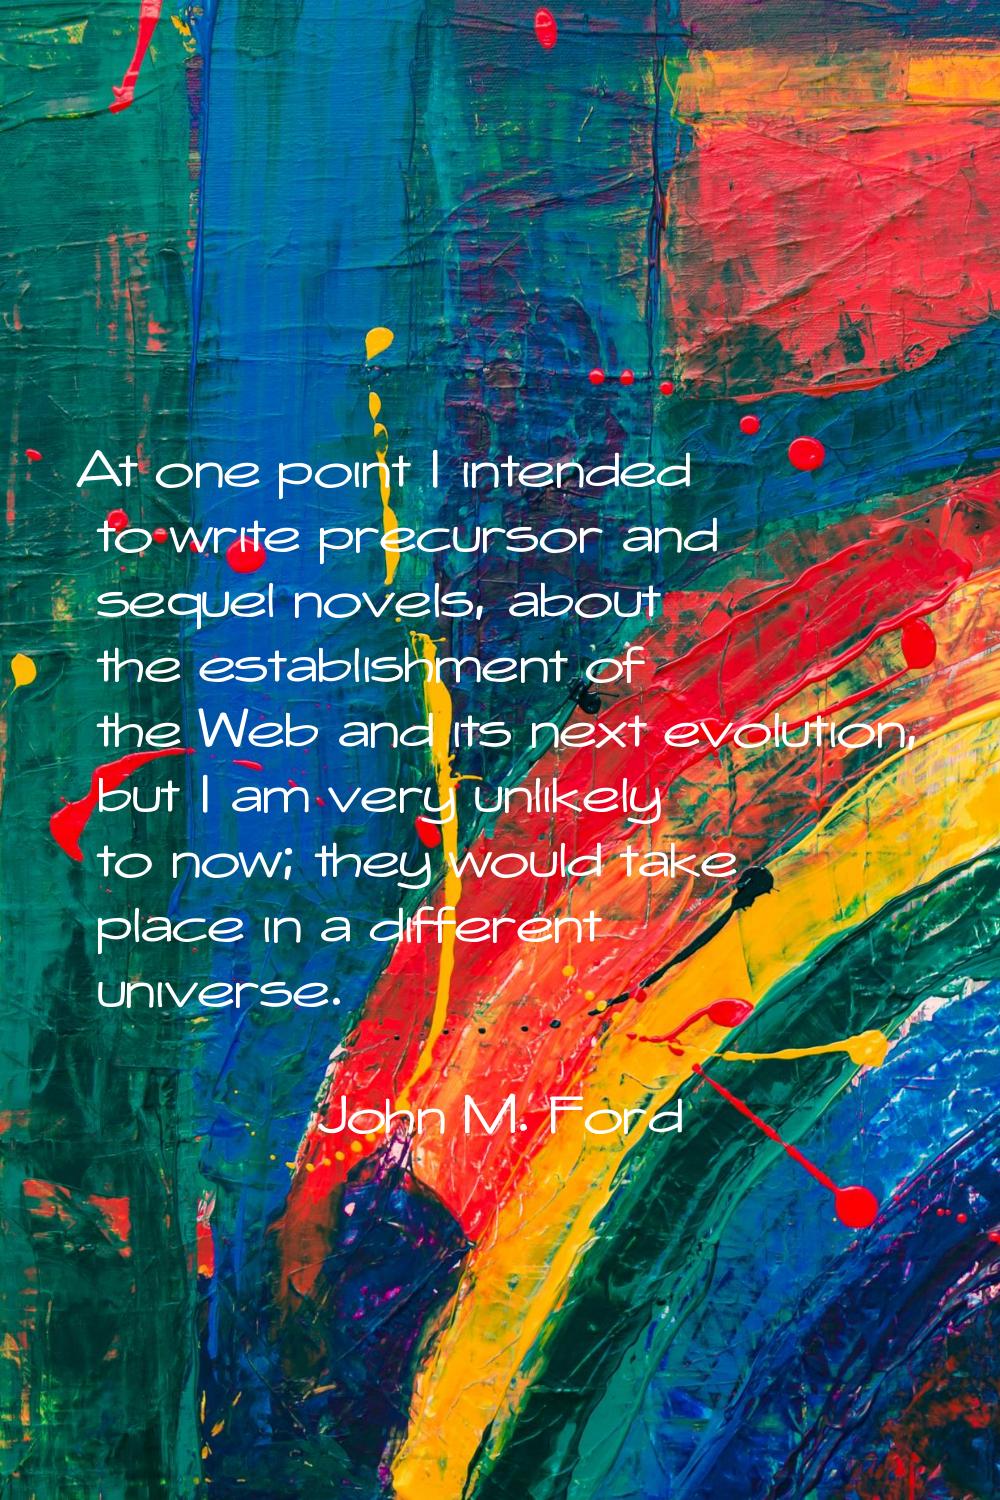 At one point I intended to write precursor and sequel novels, about the establishment of the Web an